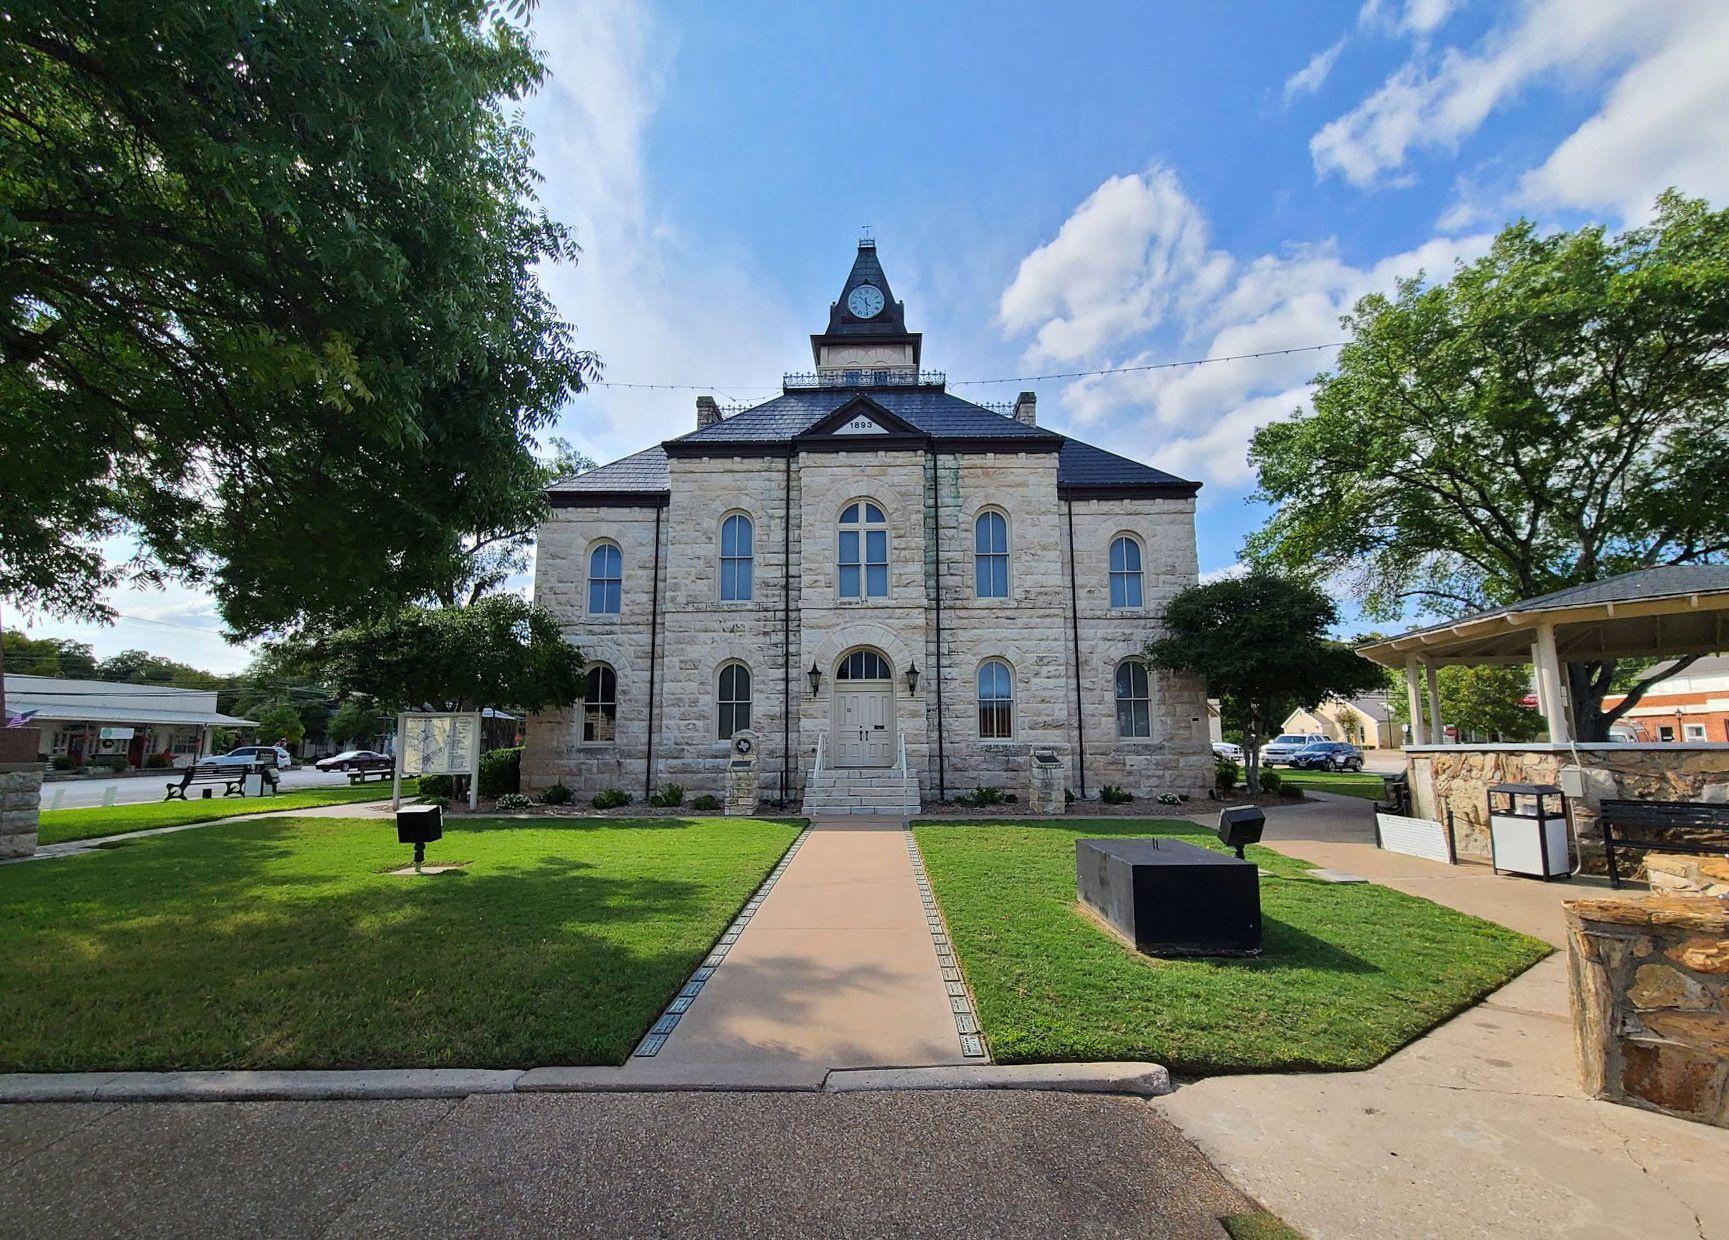 The courthouse in Glen Rose, Texas